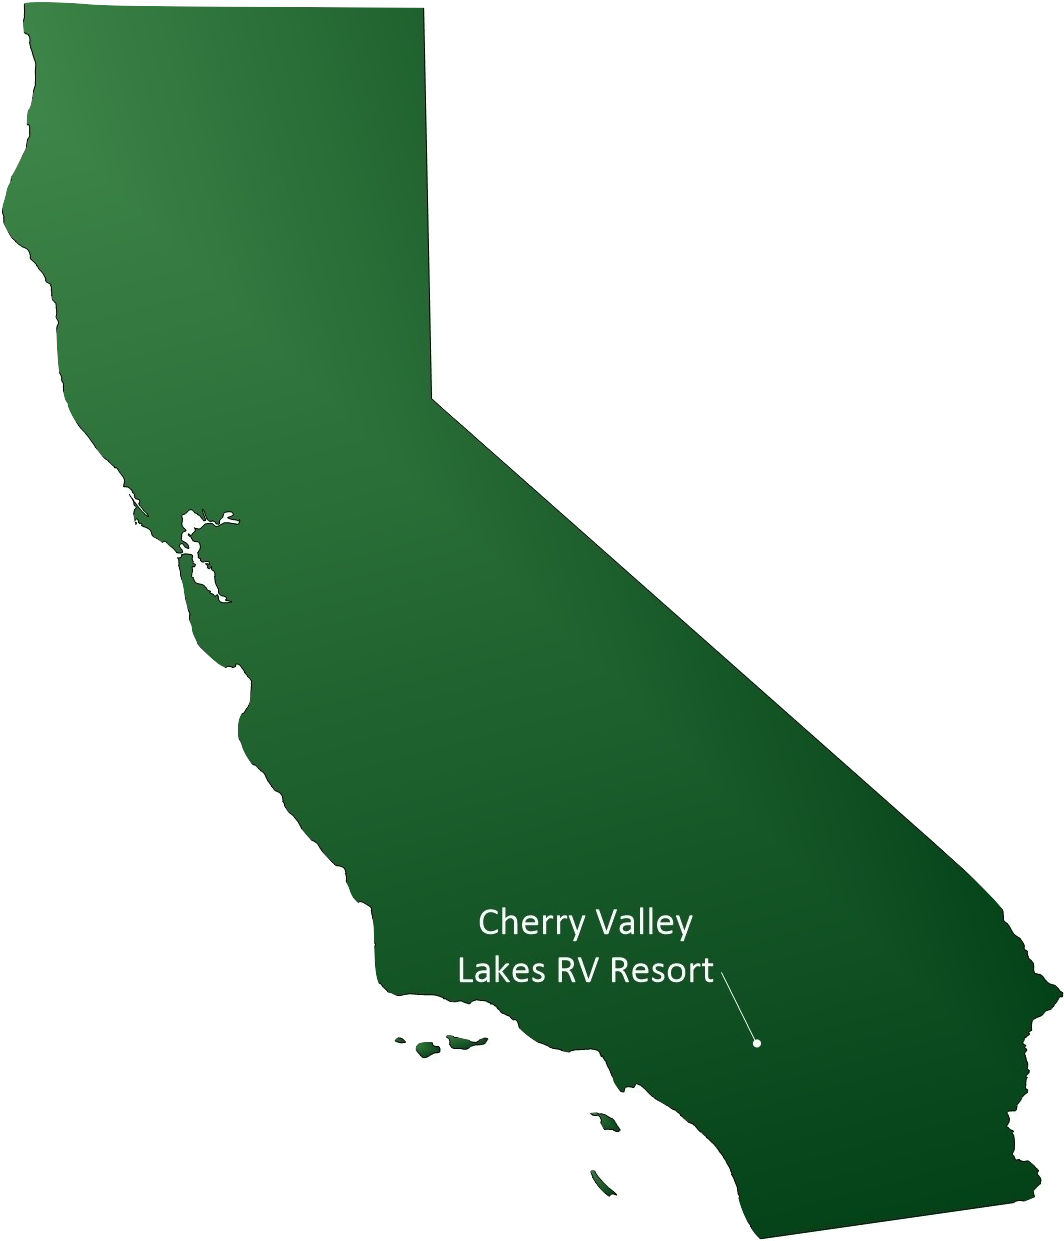 Cherry Valley Lakes on the map burned